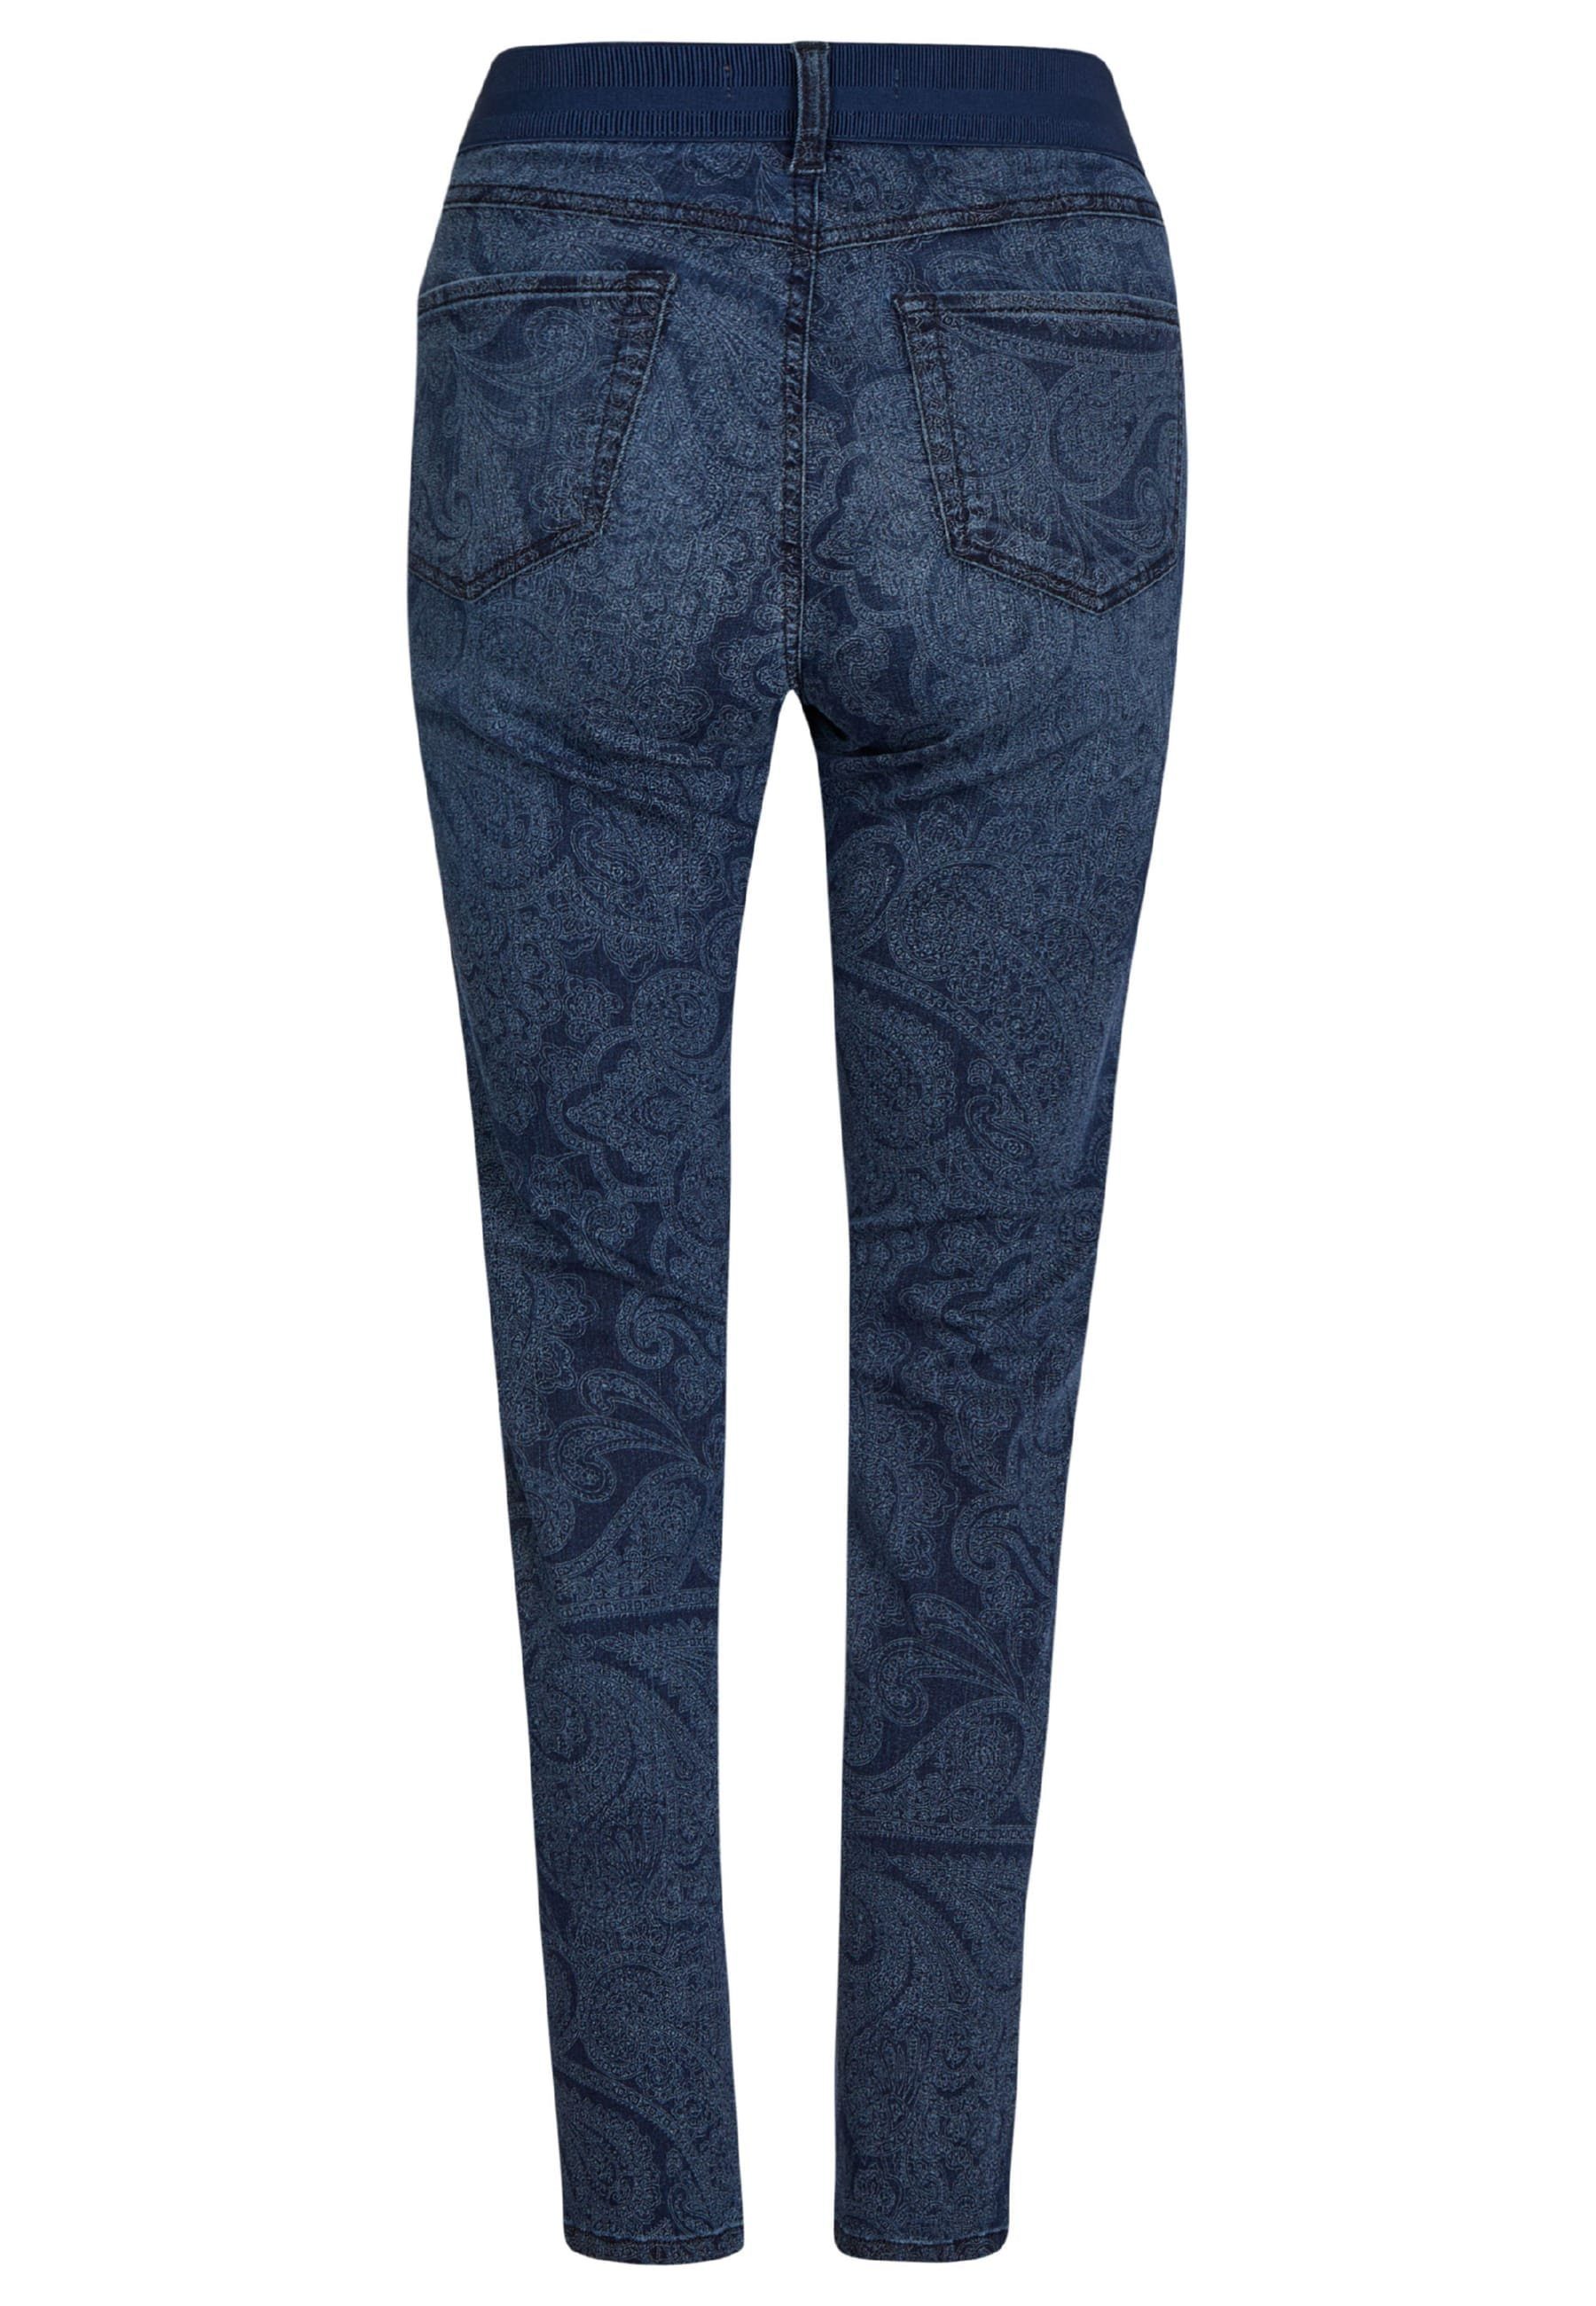 Jeans blue mit ANGELS Slim-fit-Jeans Paisley-Muster Label-Applikationen One Size mit